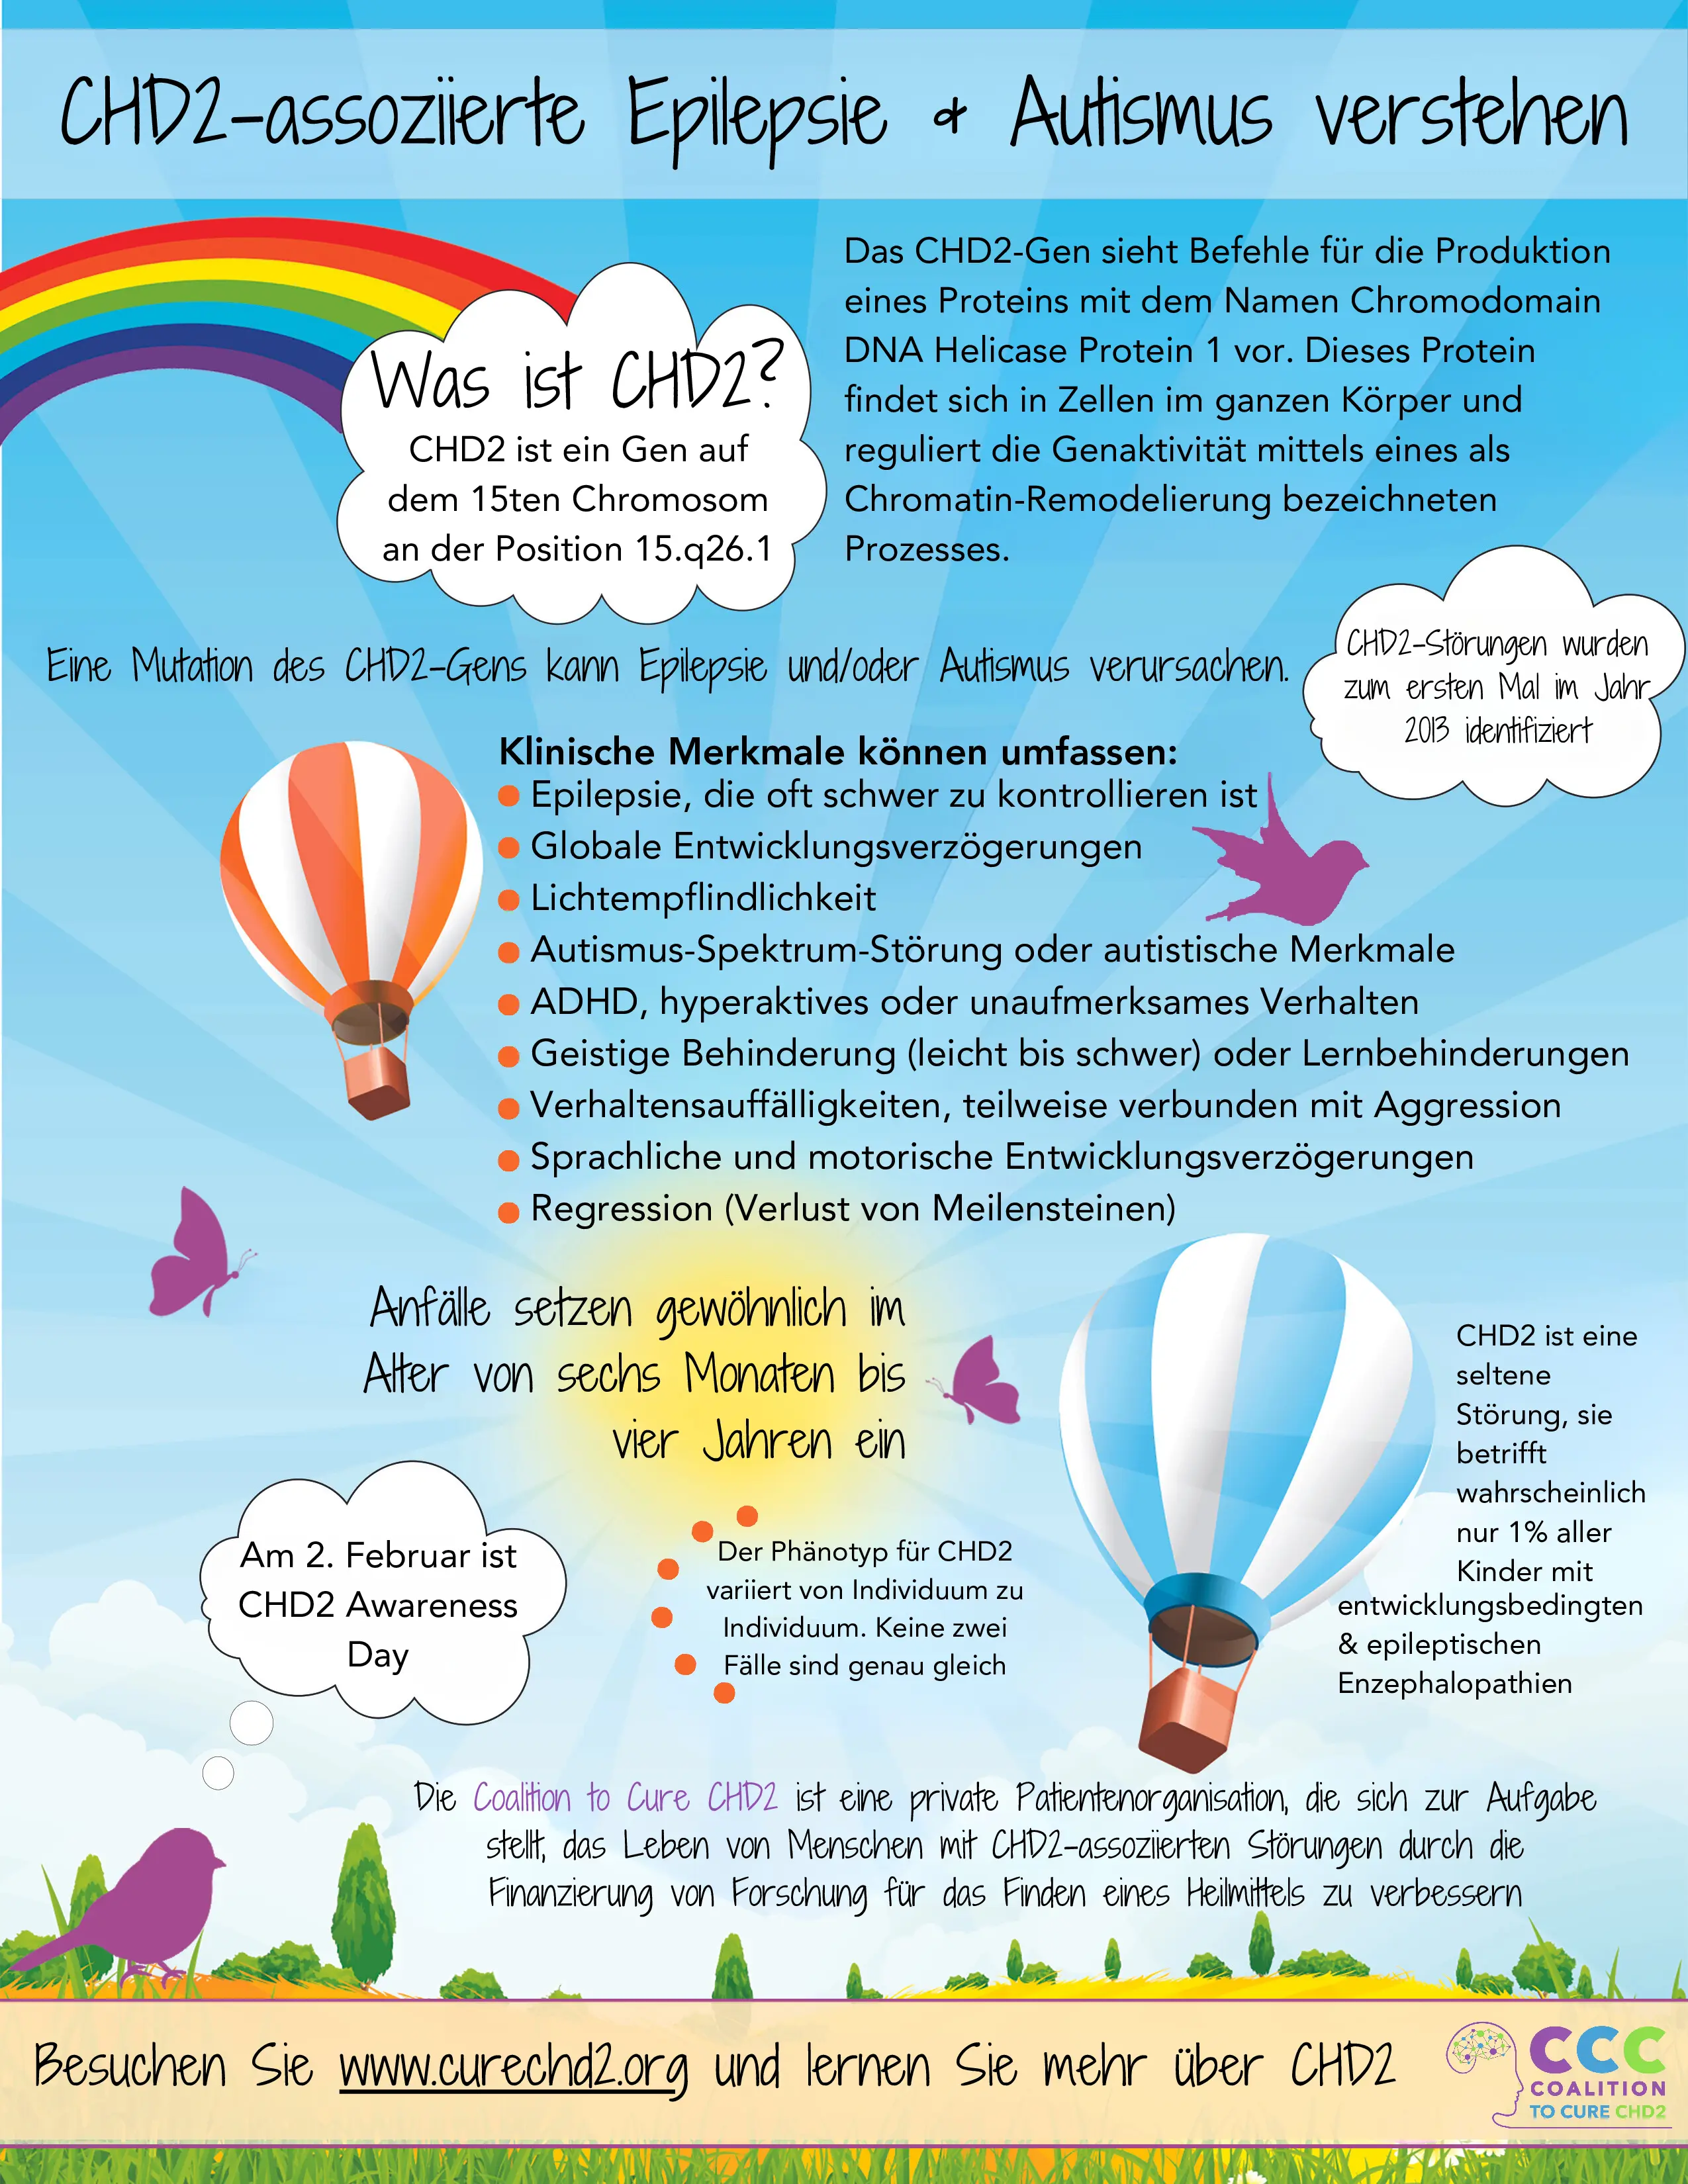 infographic about chd2 German